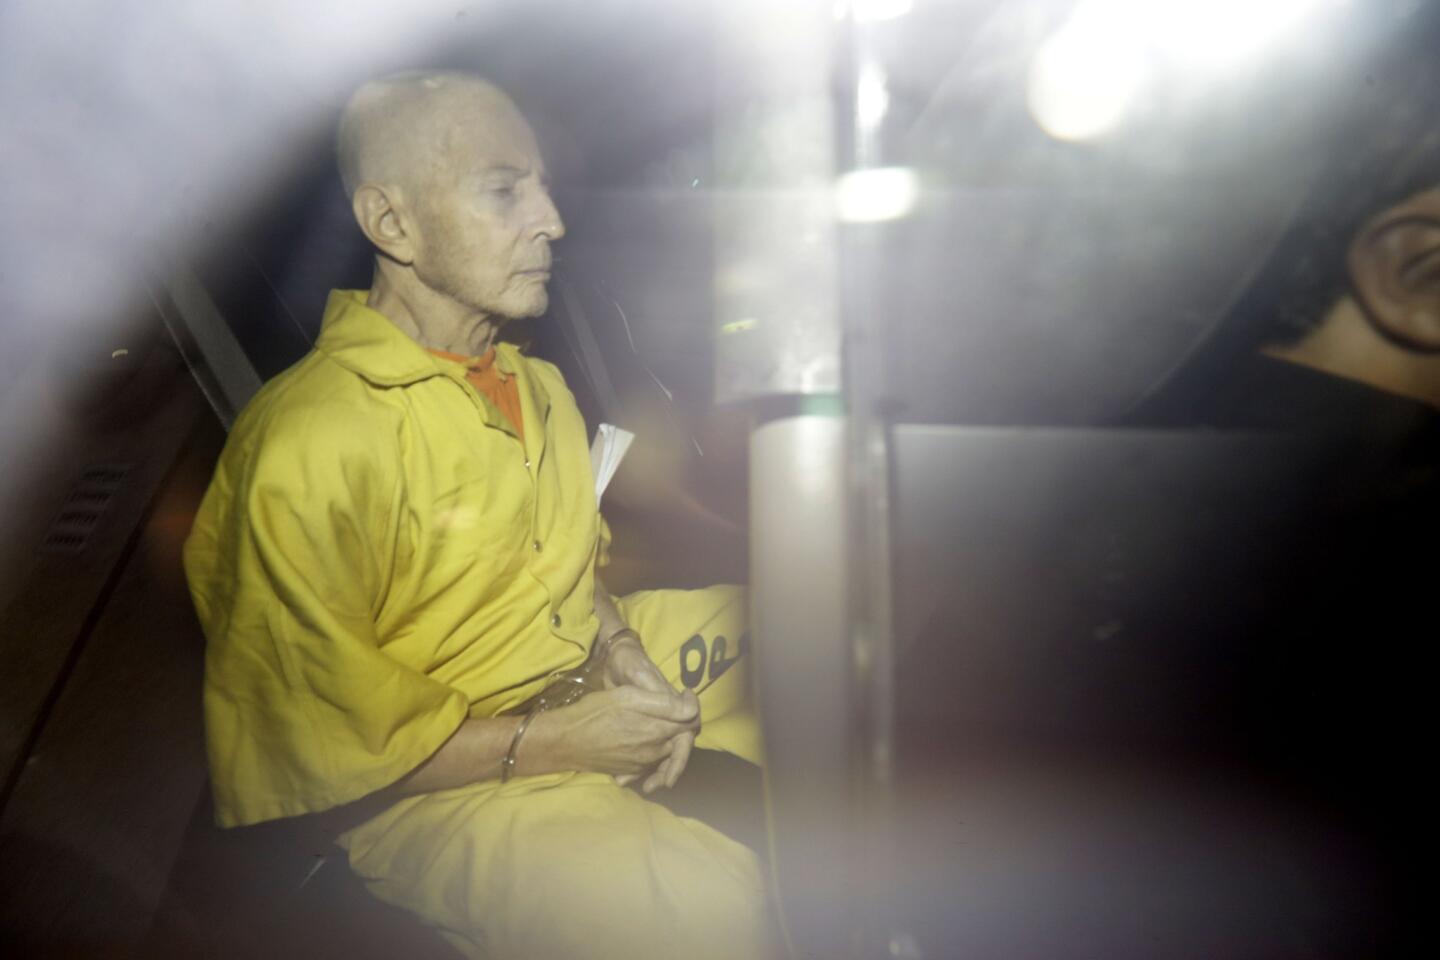 In this Tuesday, April 14, 2015 file photo, Robert Durst leaves Federal Court in an Orleans Parish Sheriff's vehicle after his arraignment. An attorney for jailed real estate heir Robert Durst says Thursday, April 23, 2015, state weapon charges have been dropped against the millionaire, clearing the way for federal proceedings in New Orleans on similar charges.